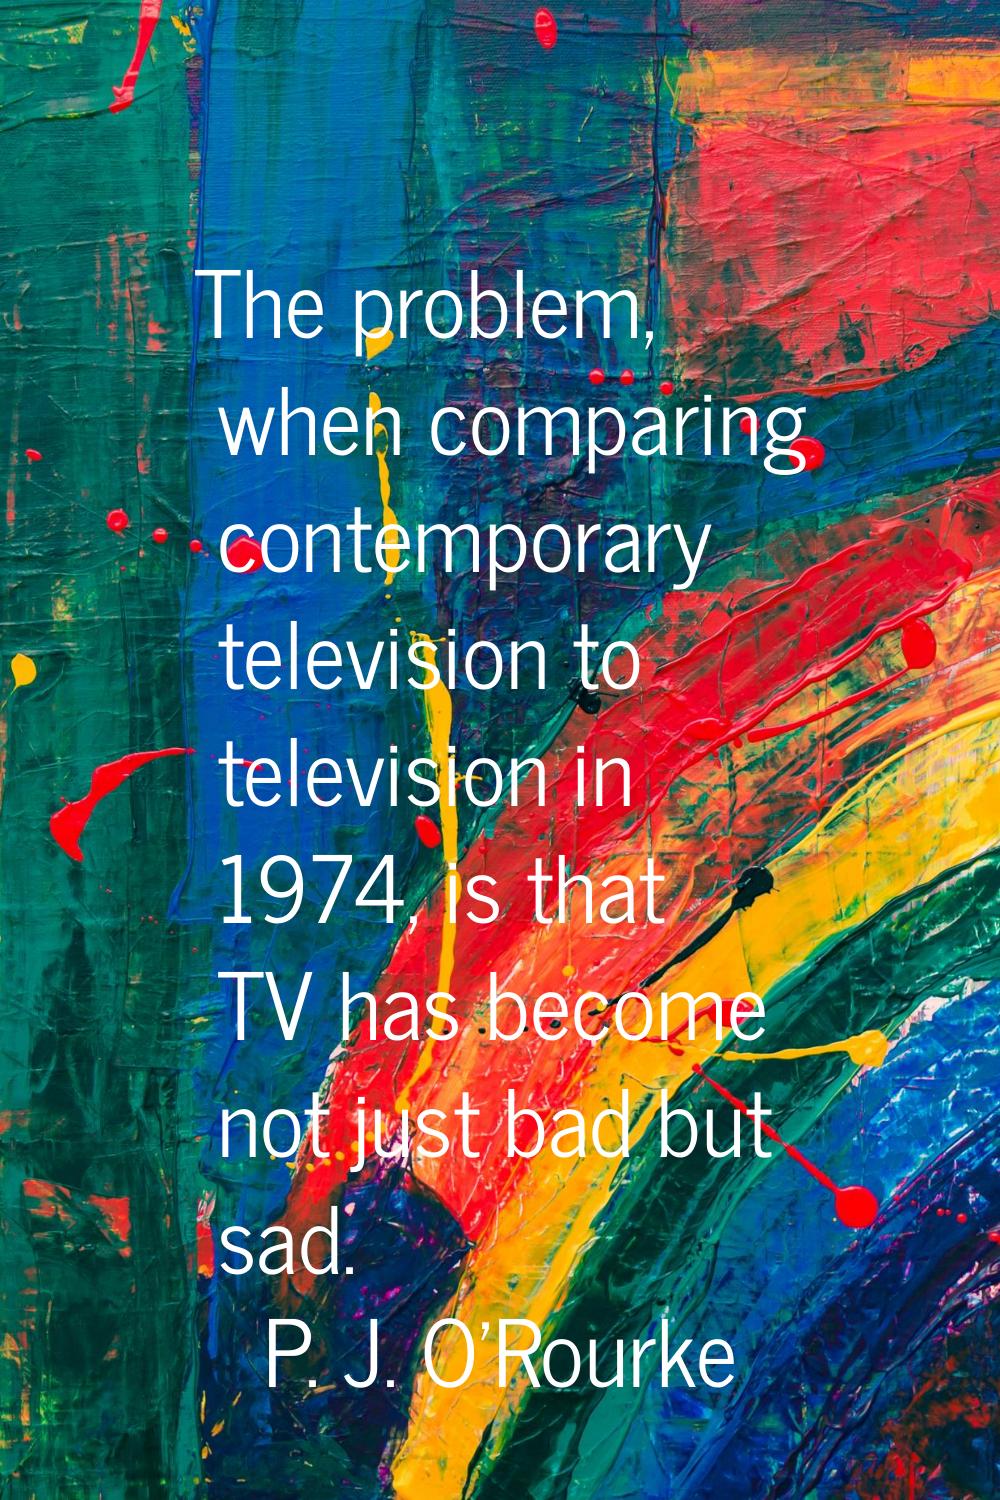 The problem, when comparing contemporary television to television in 1974, is that TV has become no